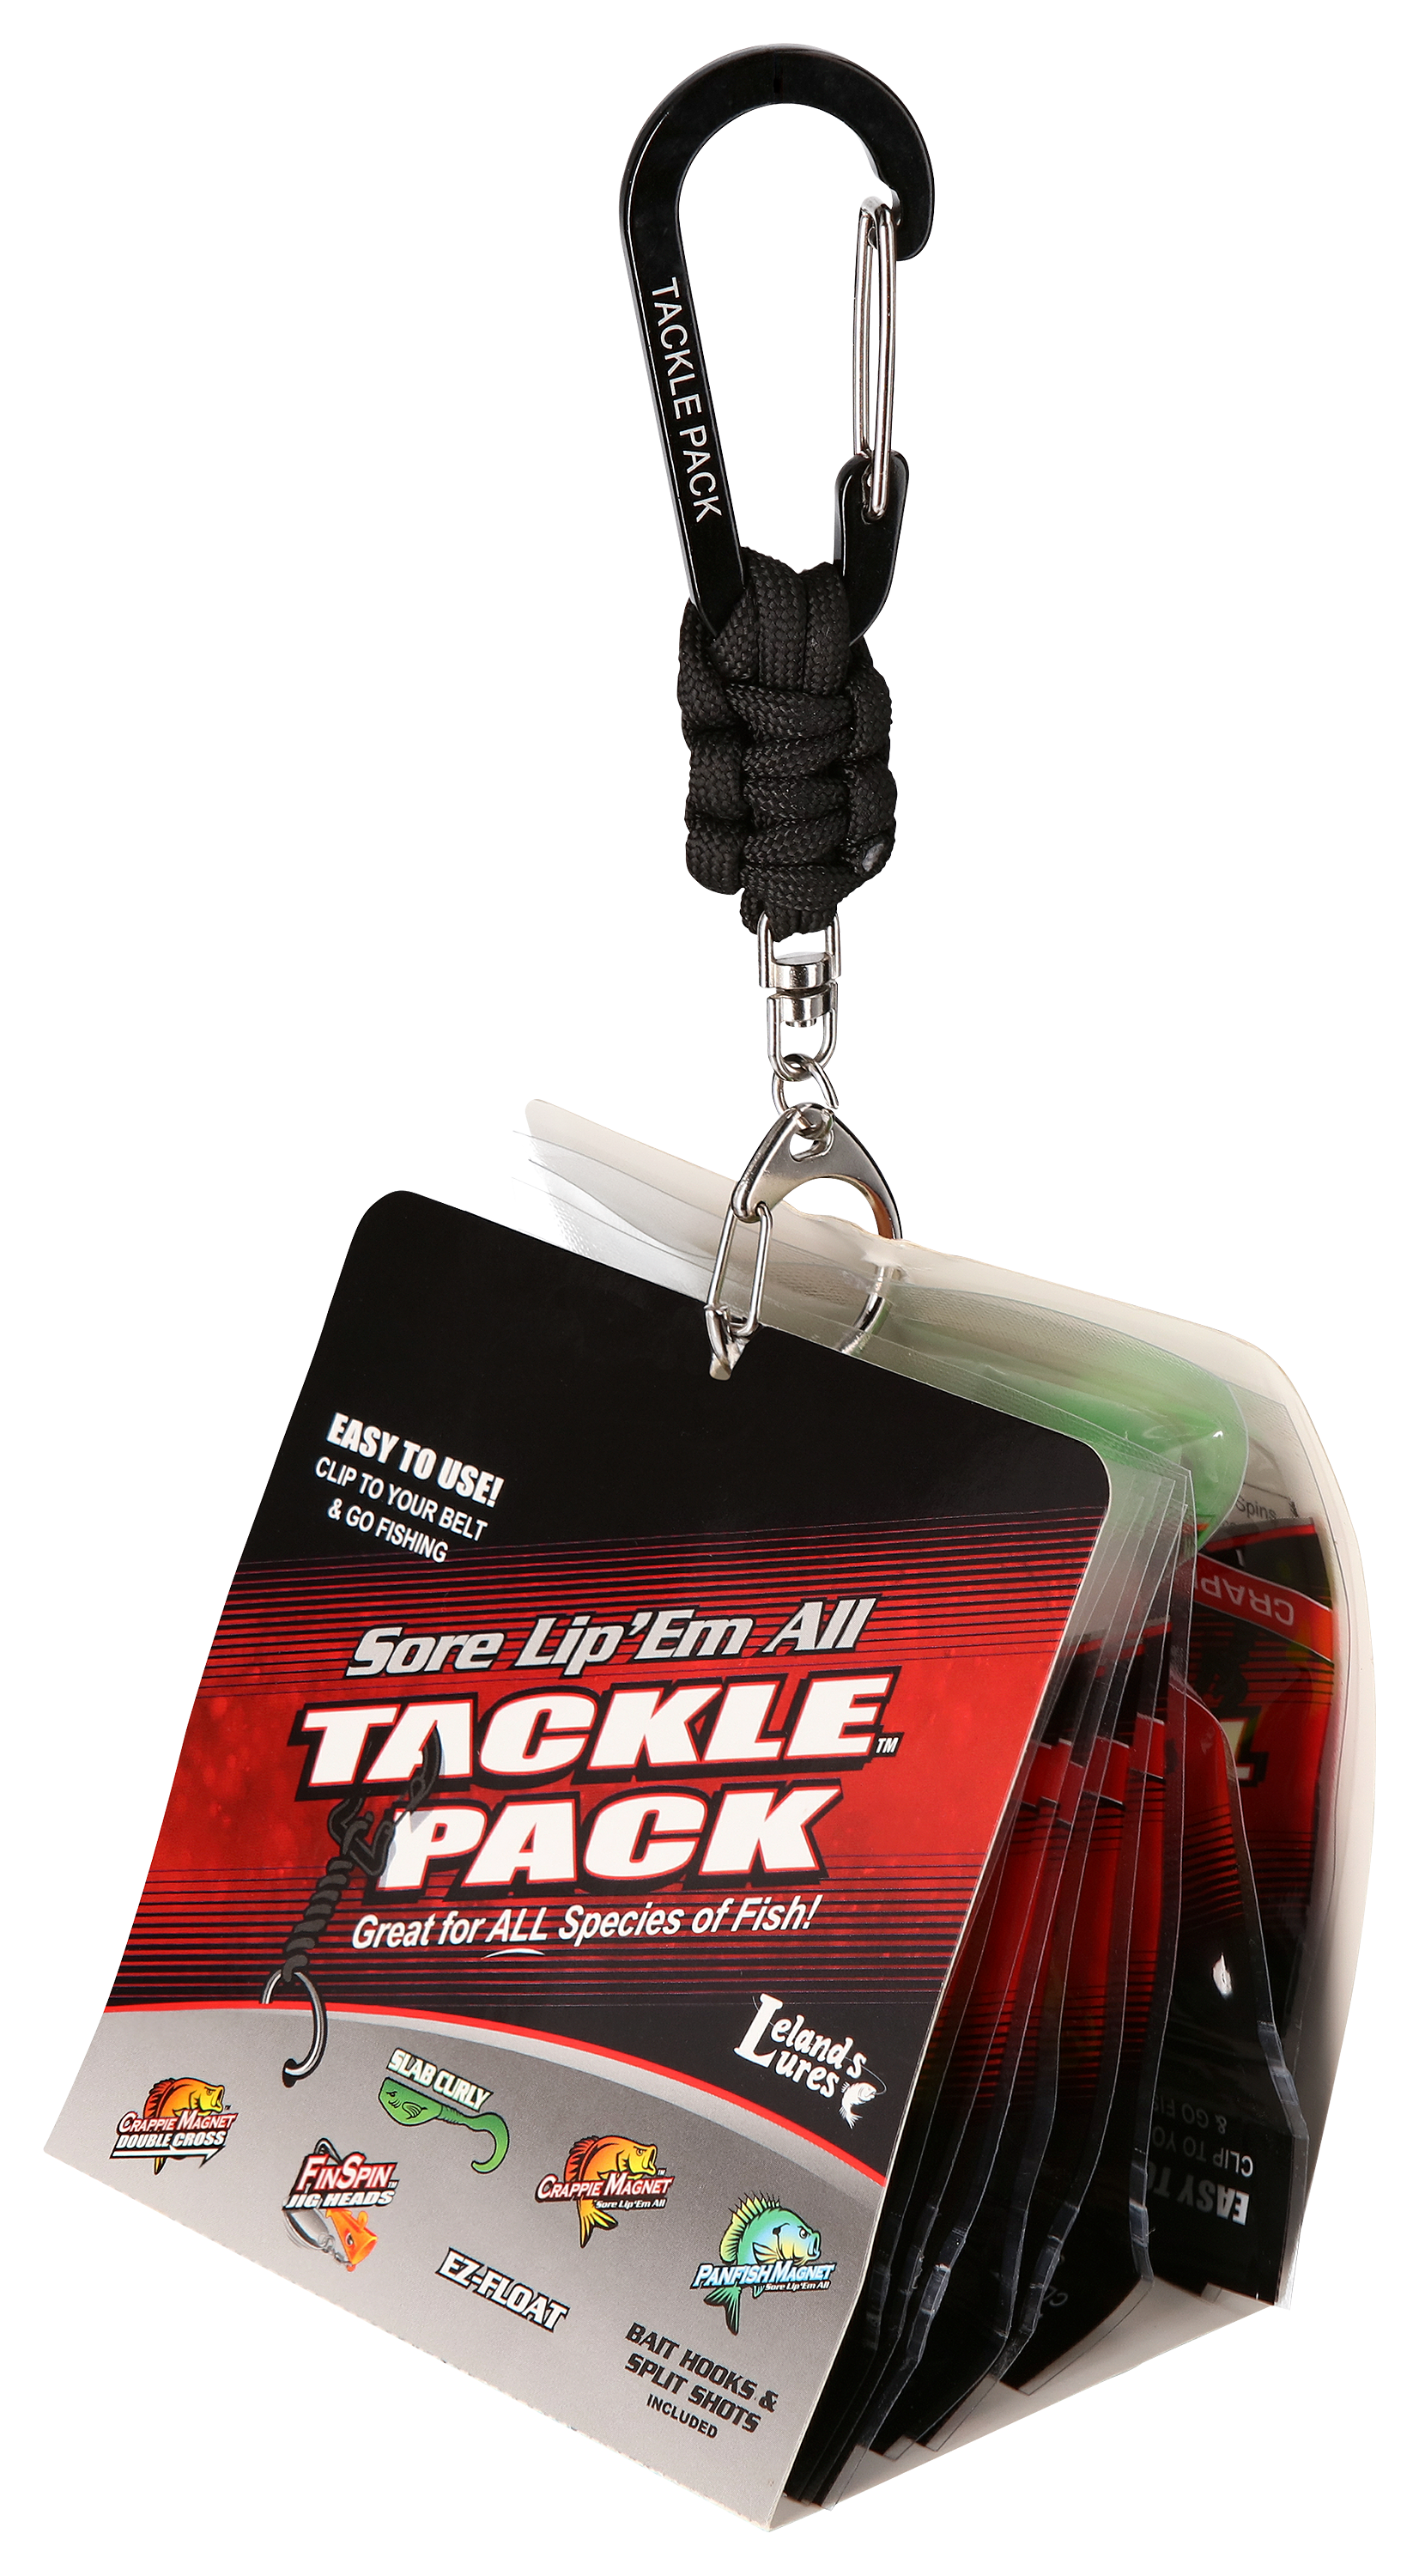 Crappie Magnet Sore Lip 'Em All 100-Piece Tackle Pack